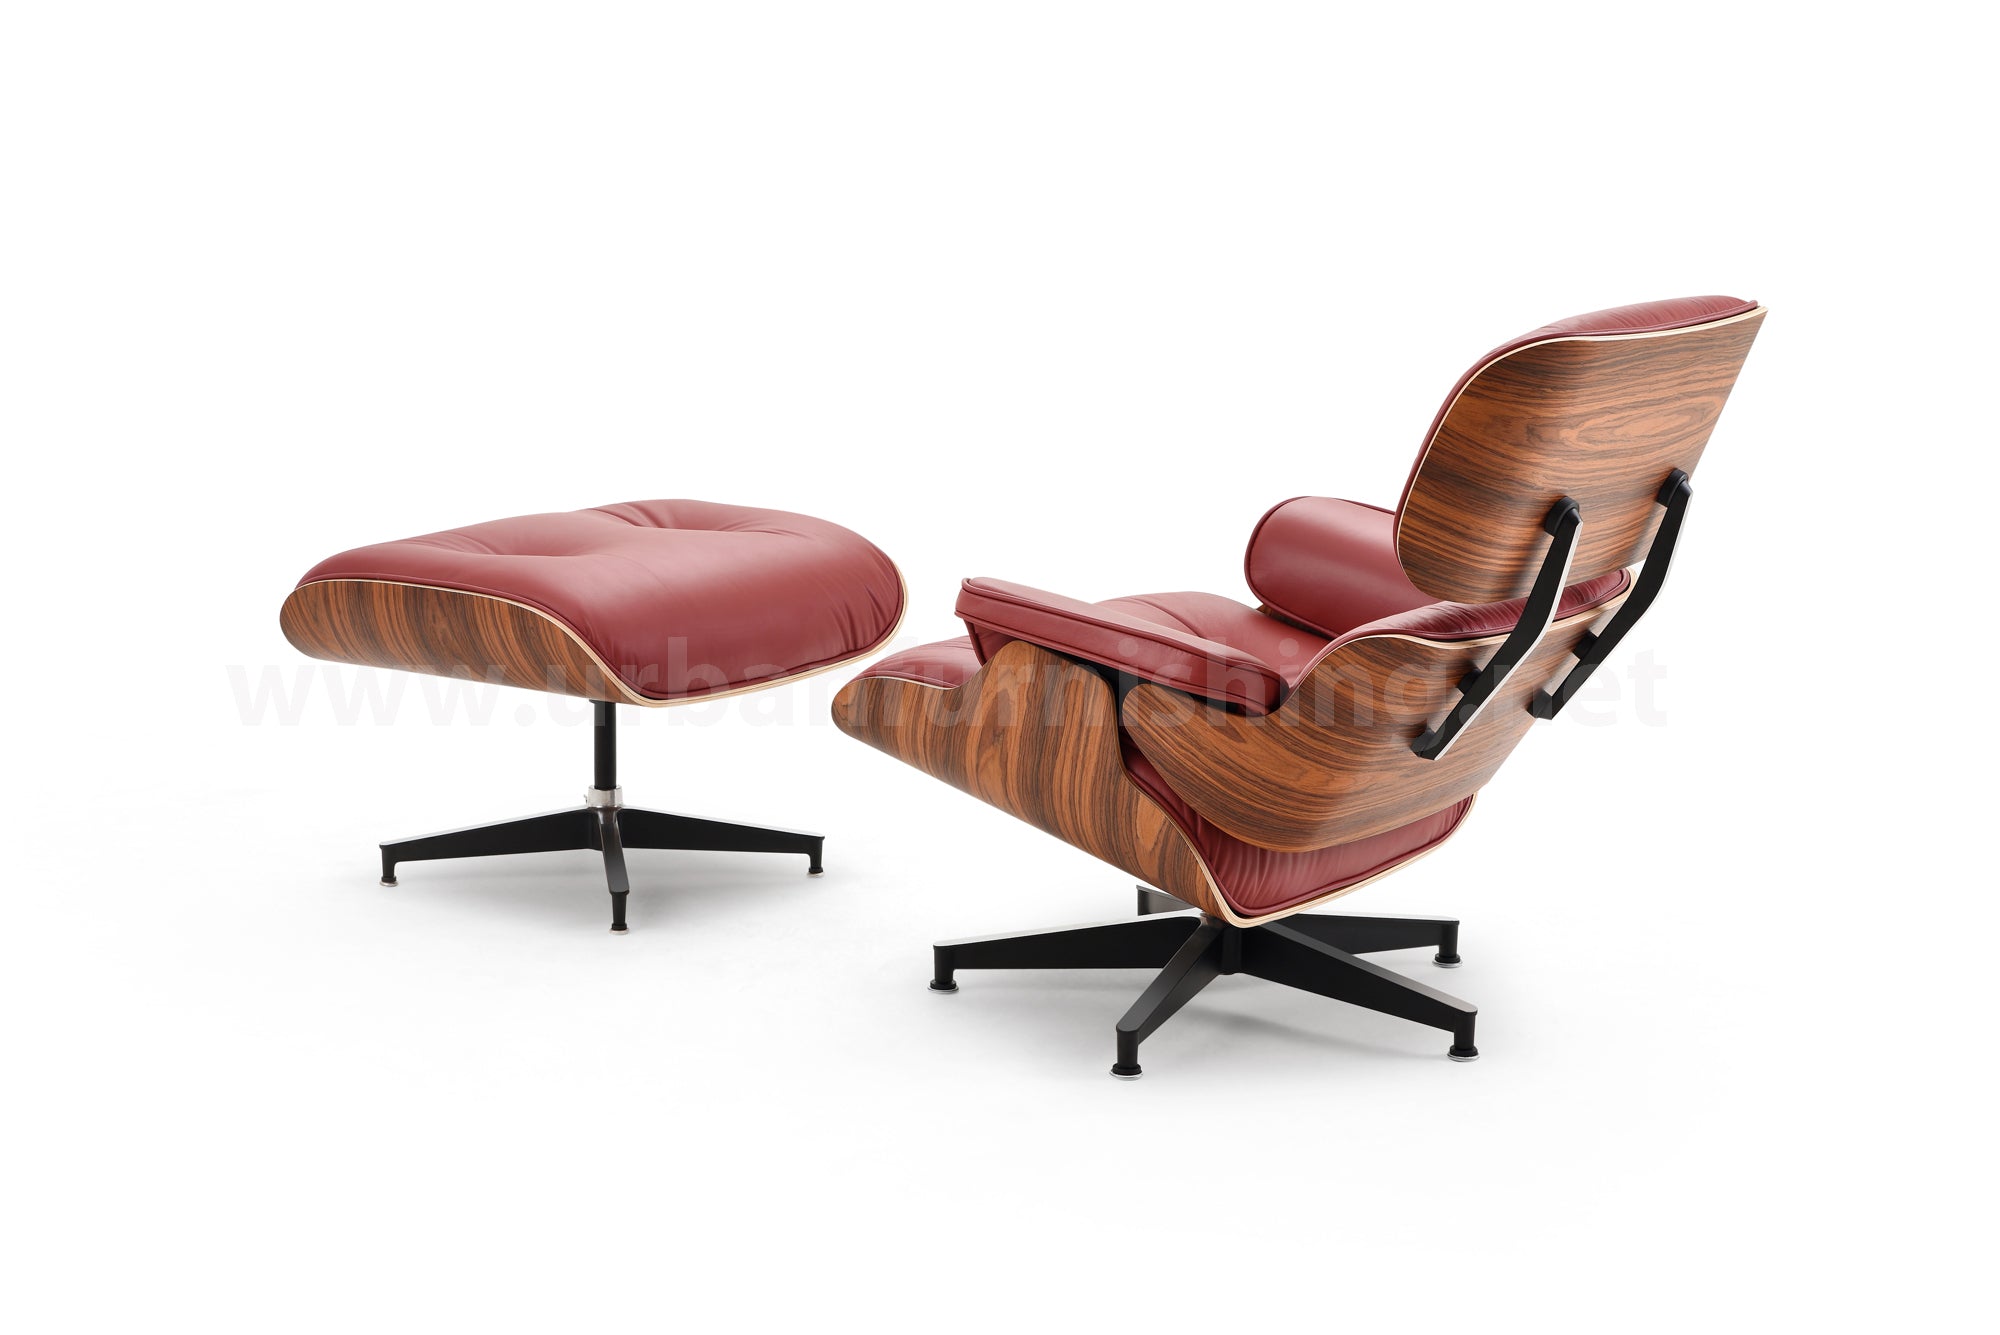 Clyde's Leather Recoloring Balm  Eames lounge chair, Leather, The balm